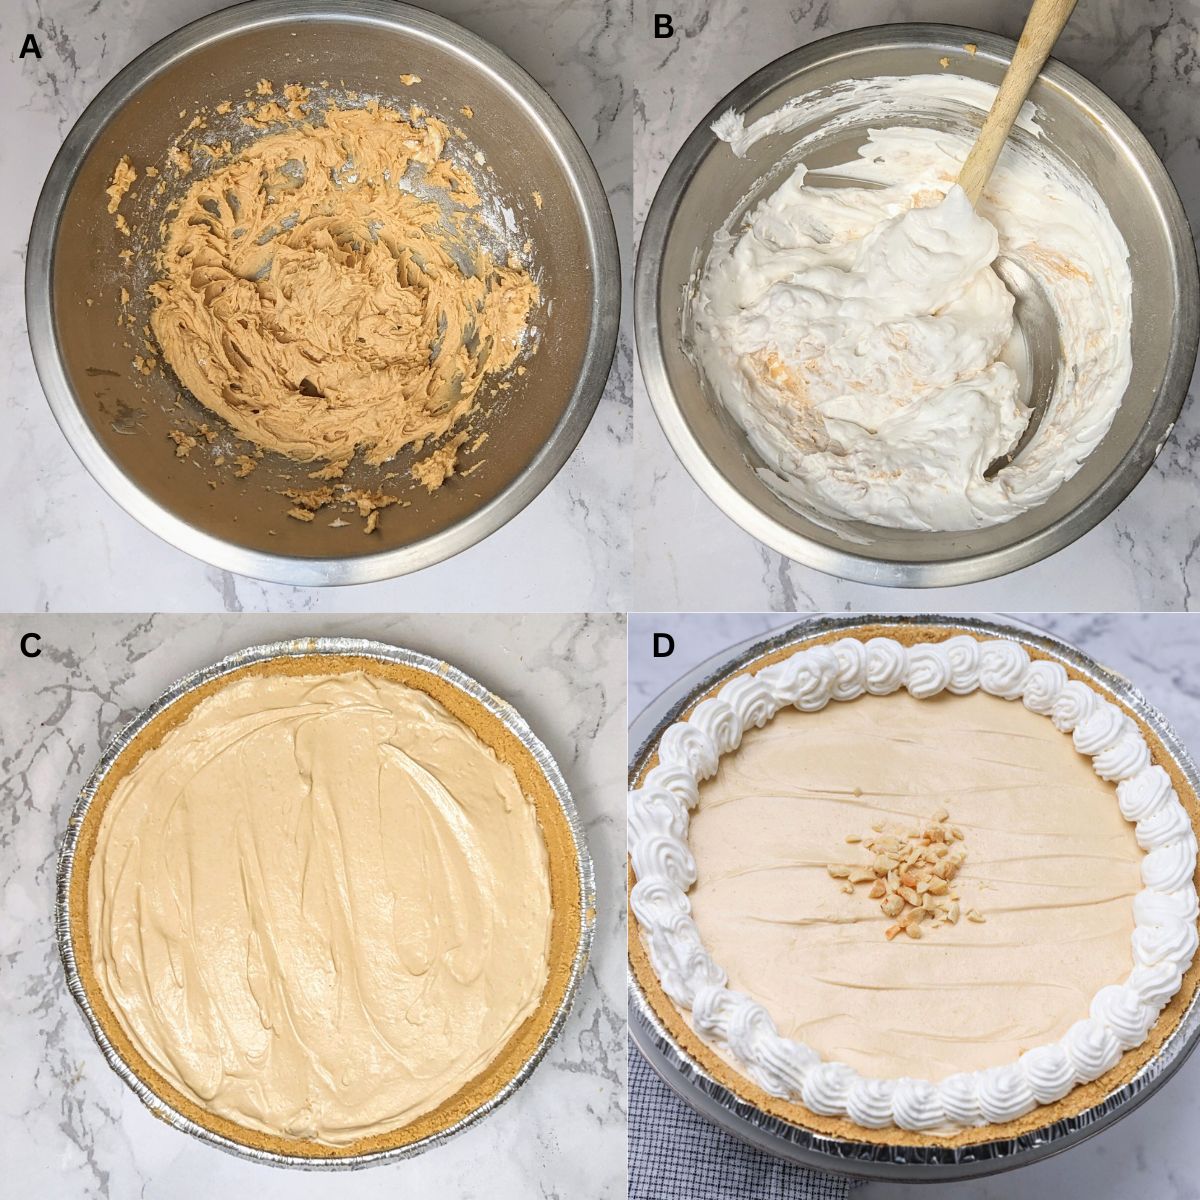 Steps for making Dolly Parton;s peanut butter pie.